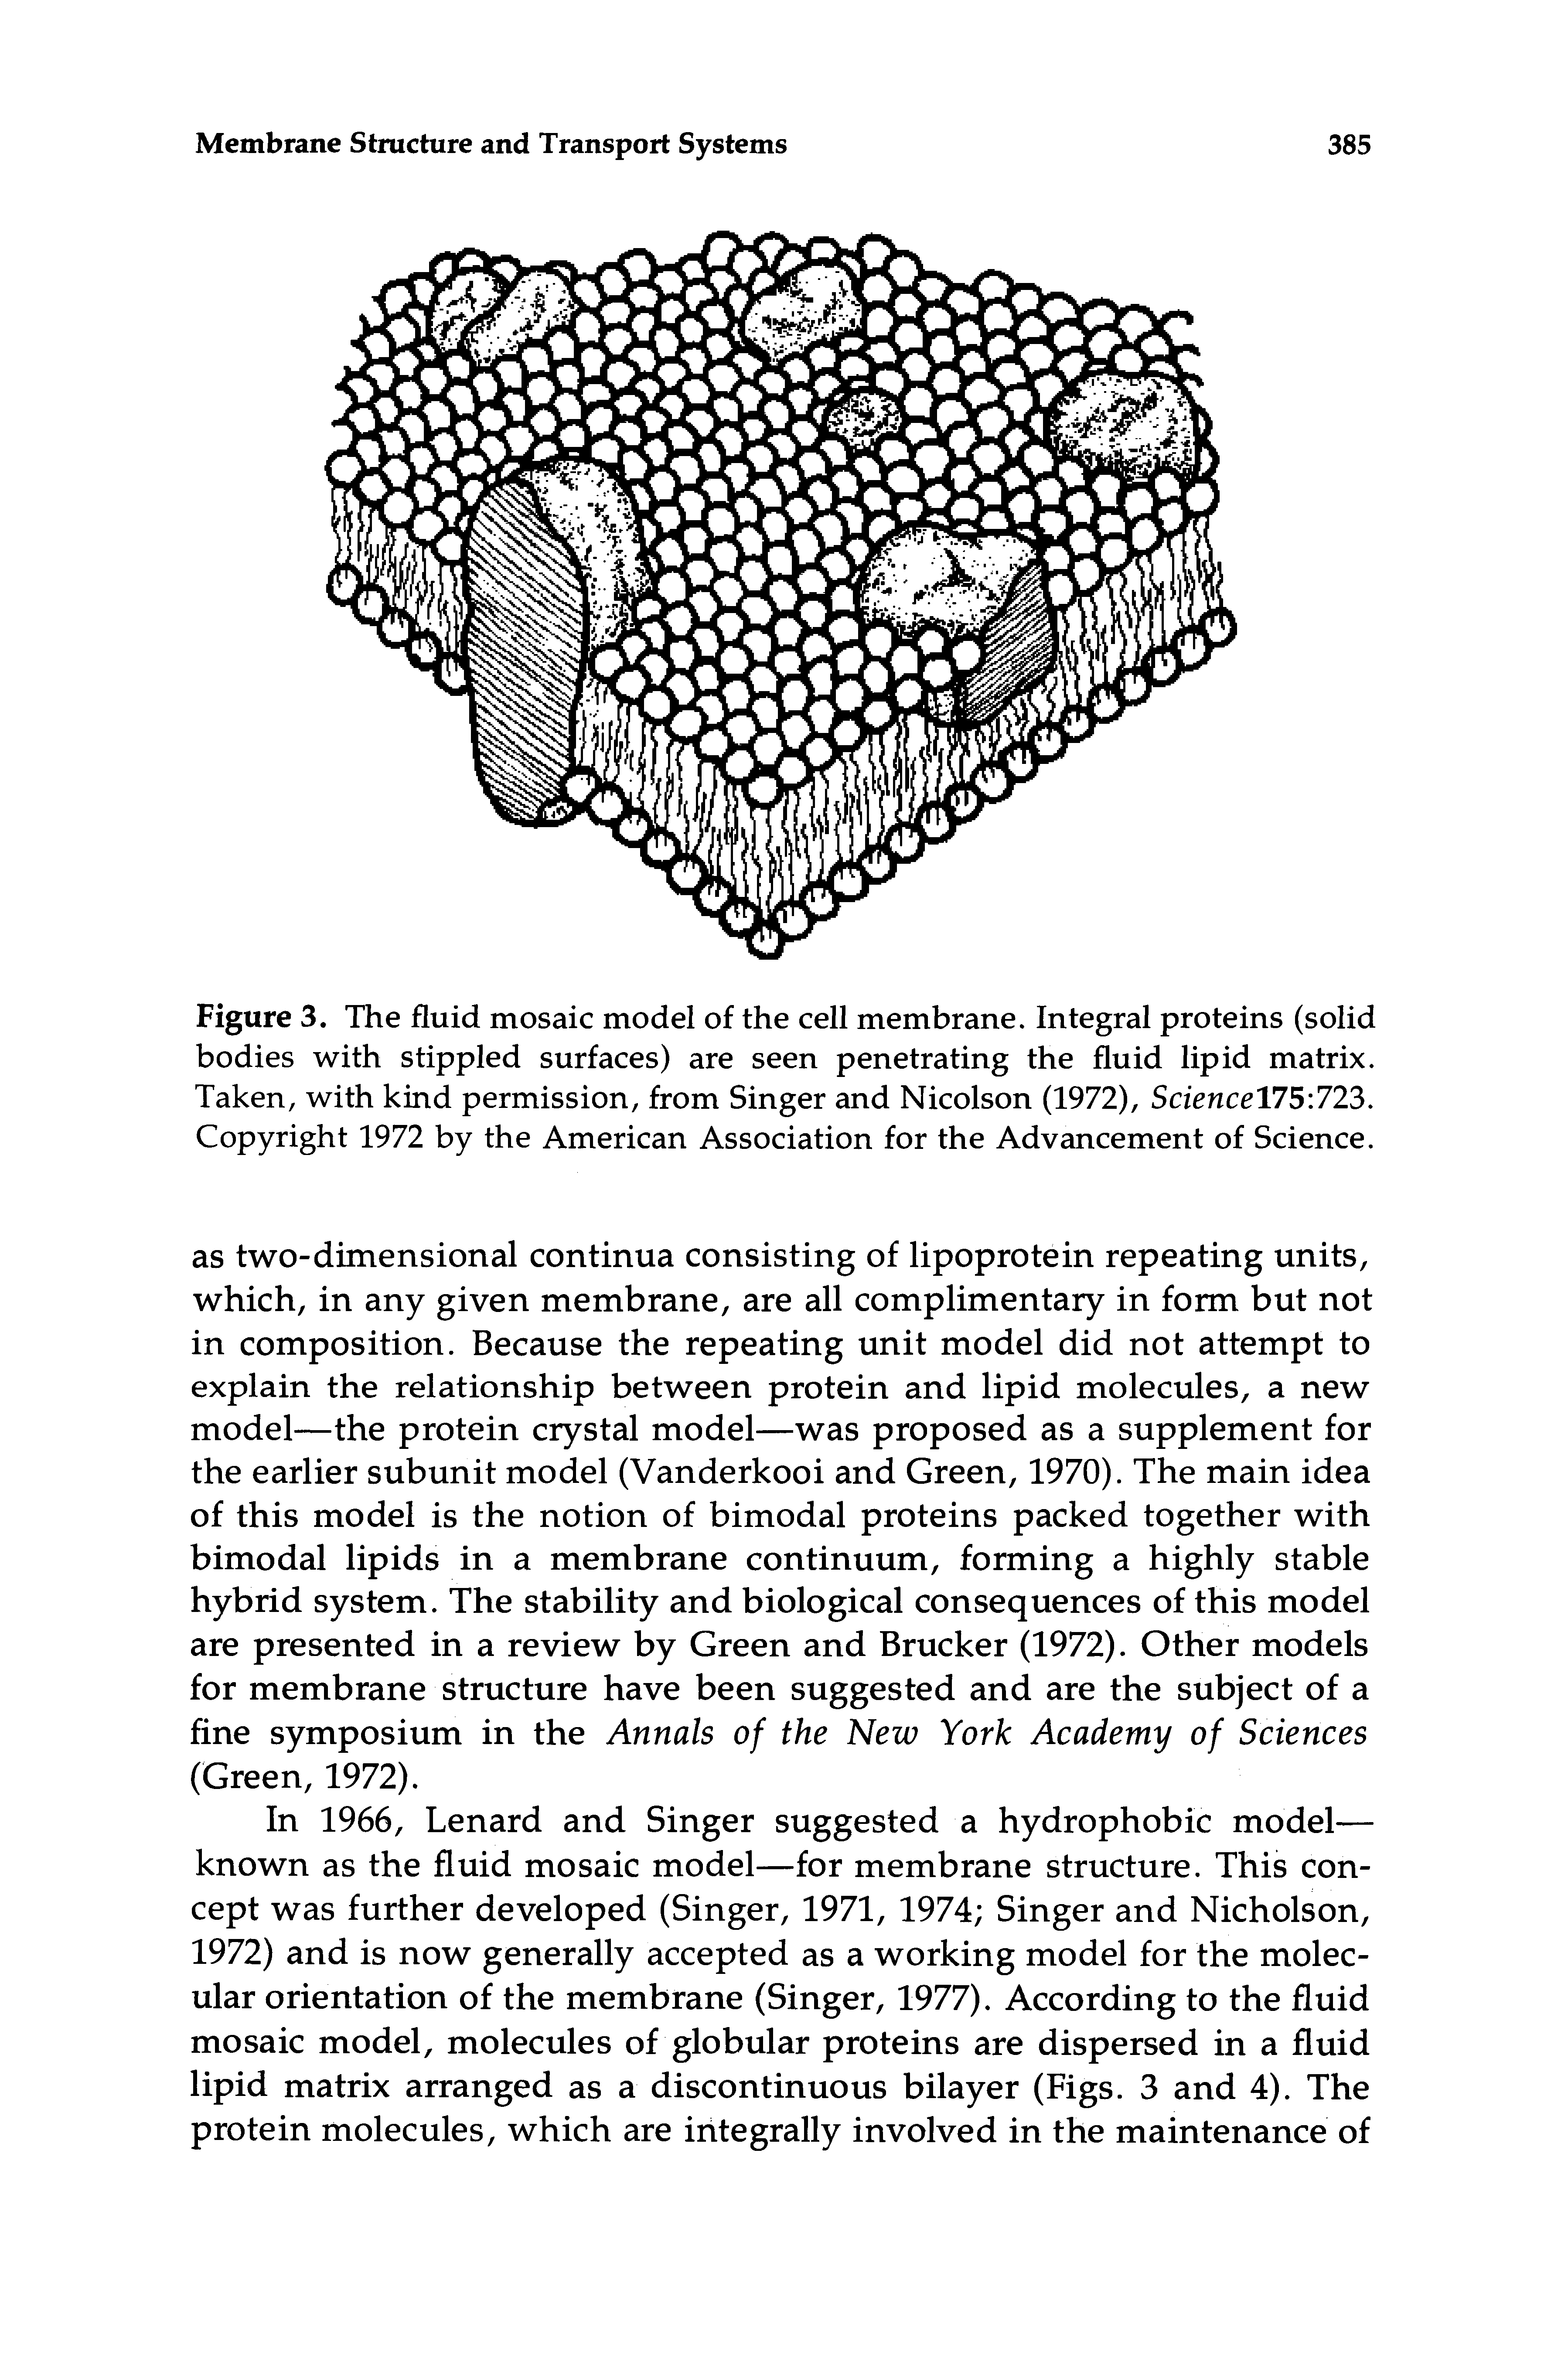 Figure 3. The fluid mosaic model of the cell membrane. Integral proteins (solid bodies with stippled surfaces) are seen penetrating the fluid lipid matrix. Taken, with kind permission, from Singer and Nicolson (1972), Science175 723. Copyright 1972 by the American Association for the Advancement of Science.